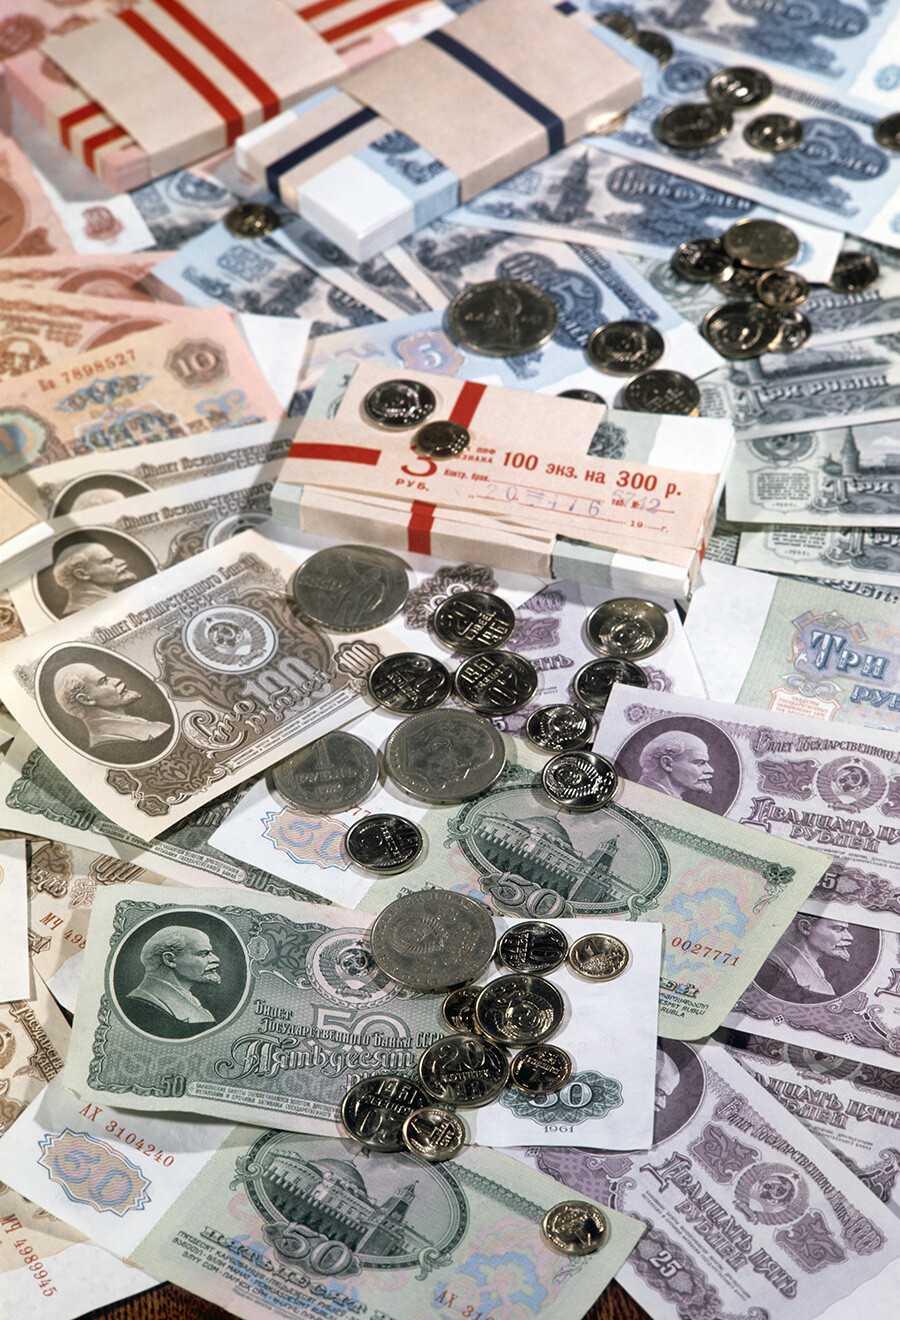 Soviet banknotes and coins